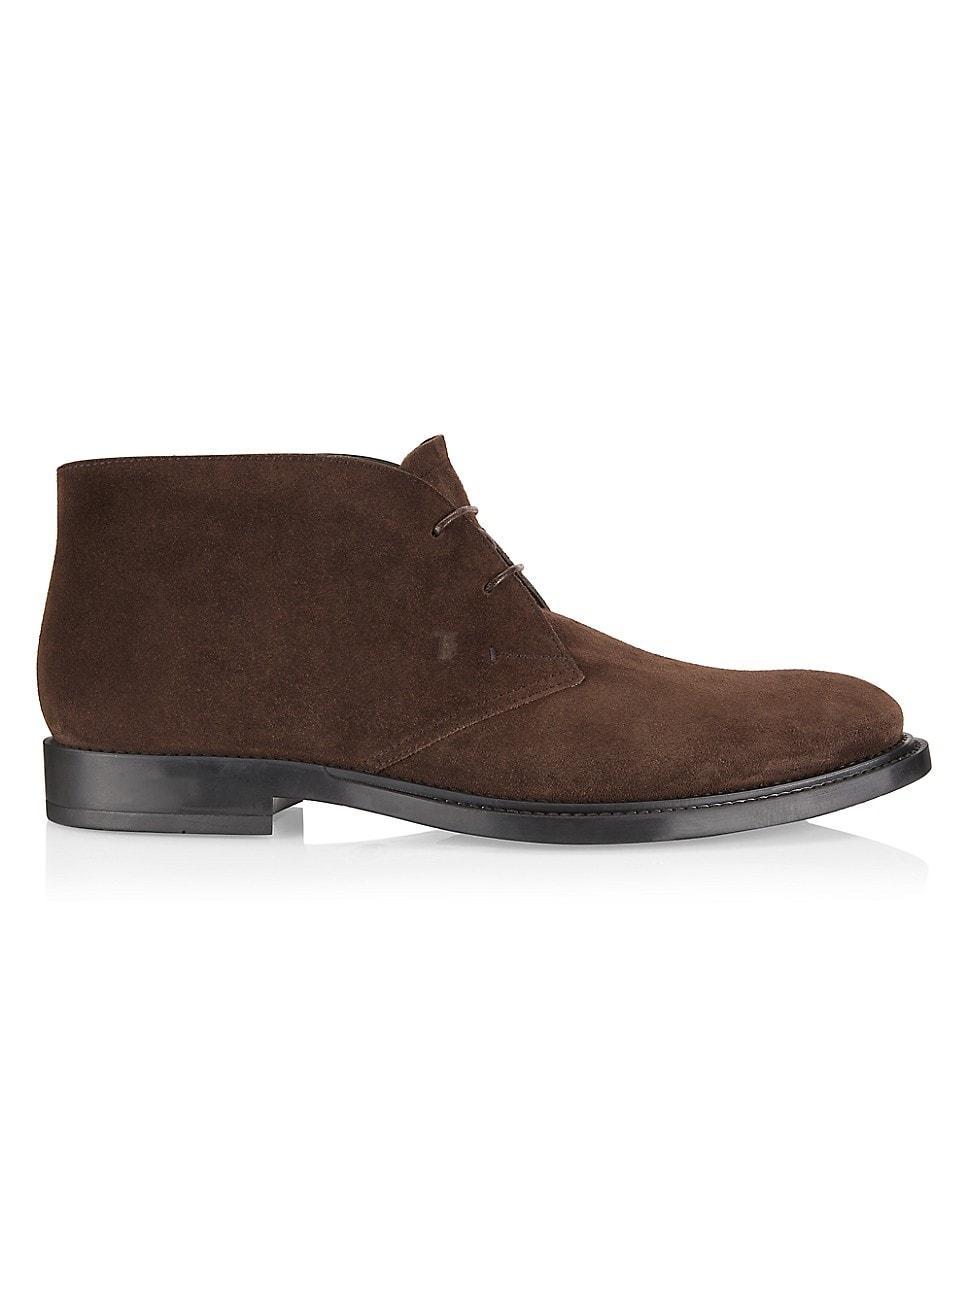 Tods Gomma Chukka Boot Product Image